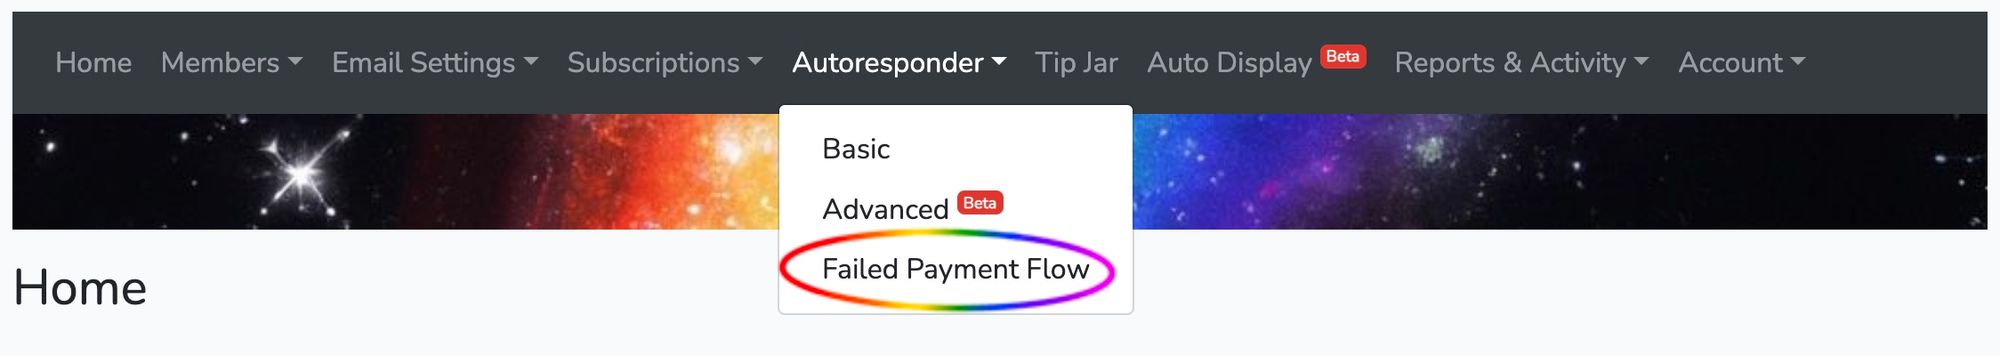 Failed Payment Flow circled in Autoresponder menu